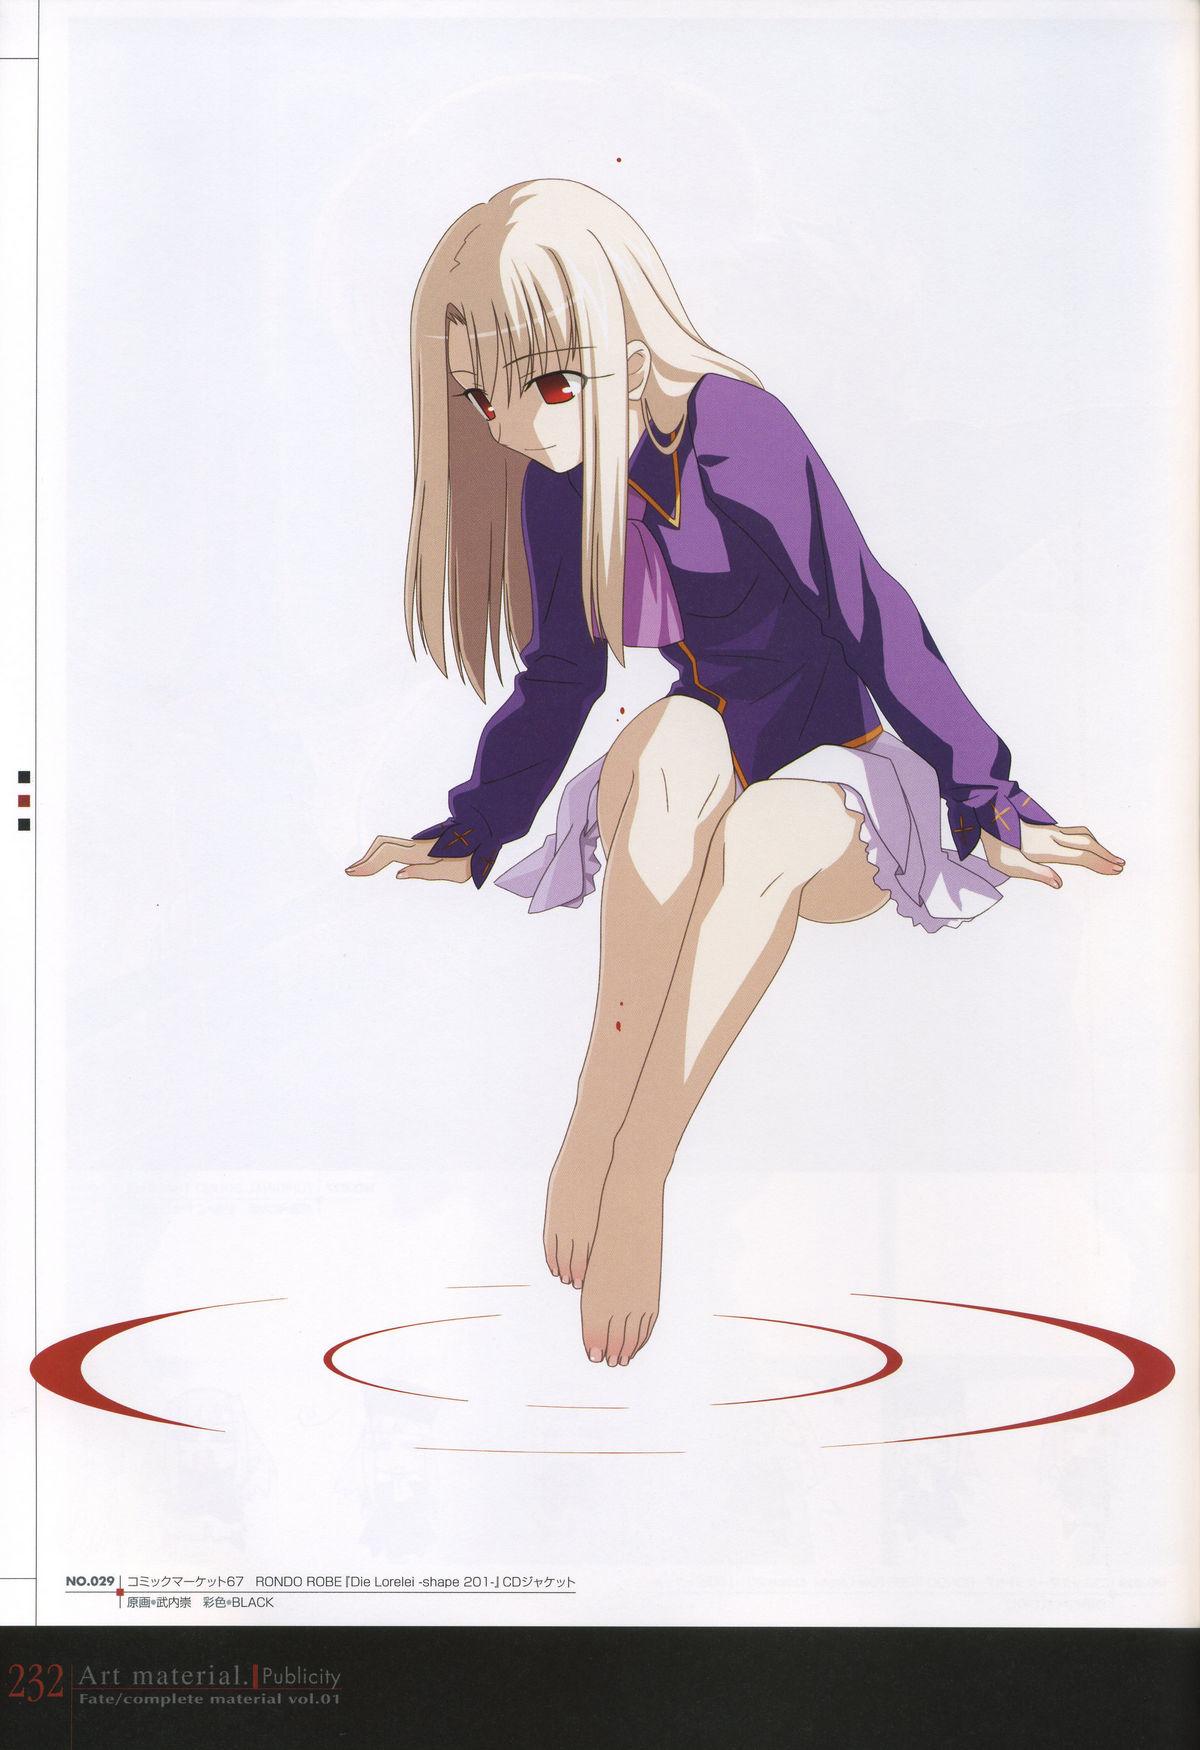 Fate/complete material I - Art material. 236